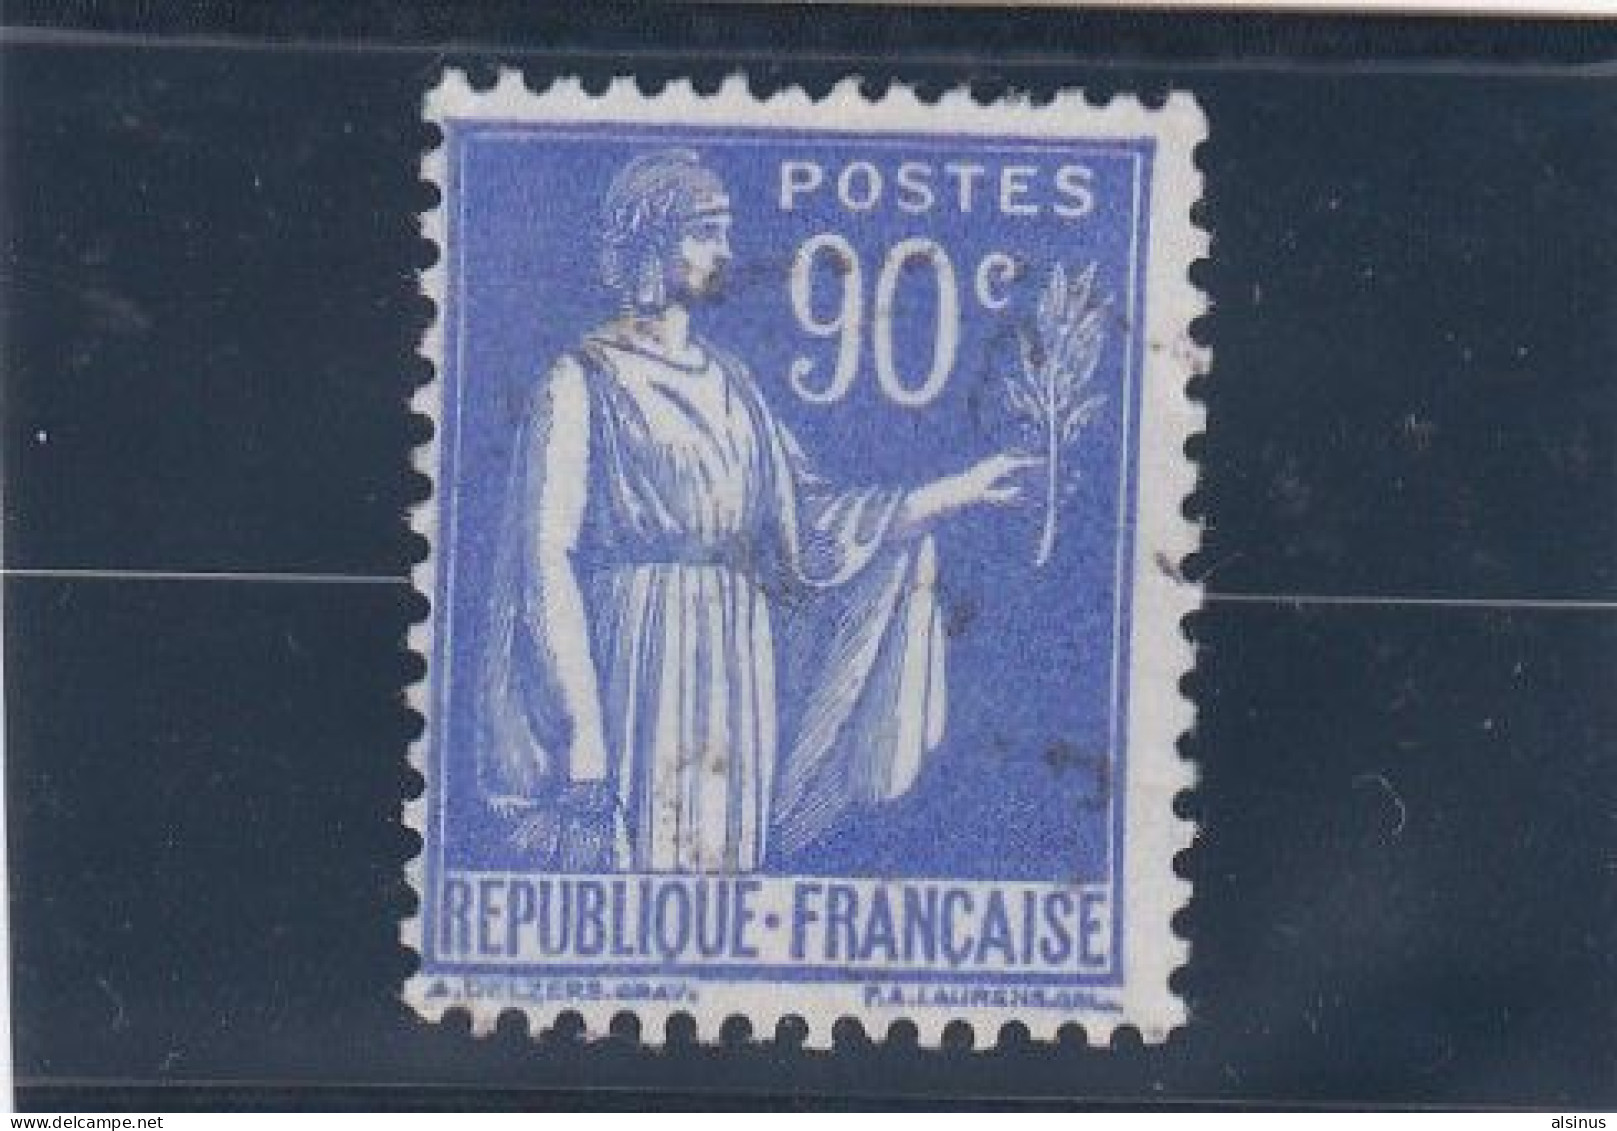 FRANCE - TYPE PAIX - N° 368b - 90 C OUTREMER - TYPE II - NEUF SANS GOMME - 1932-39 Peace